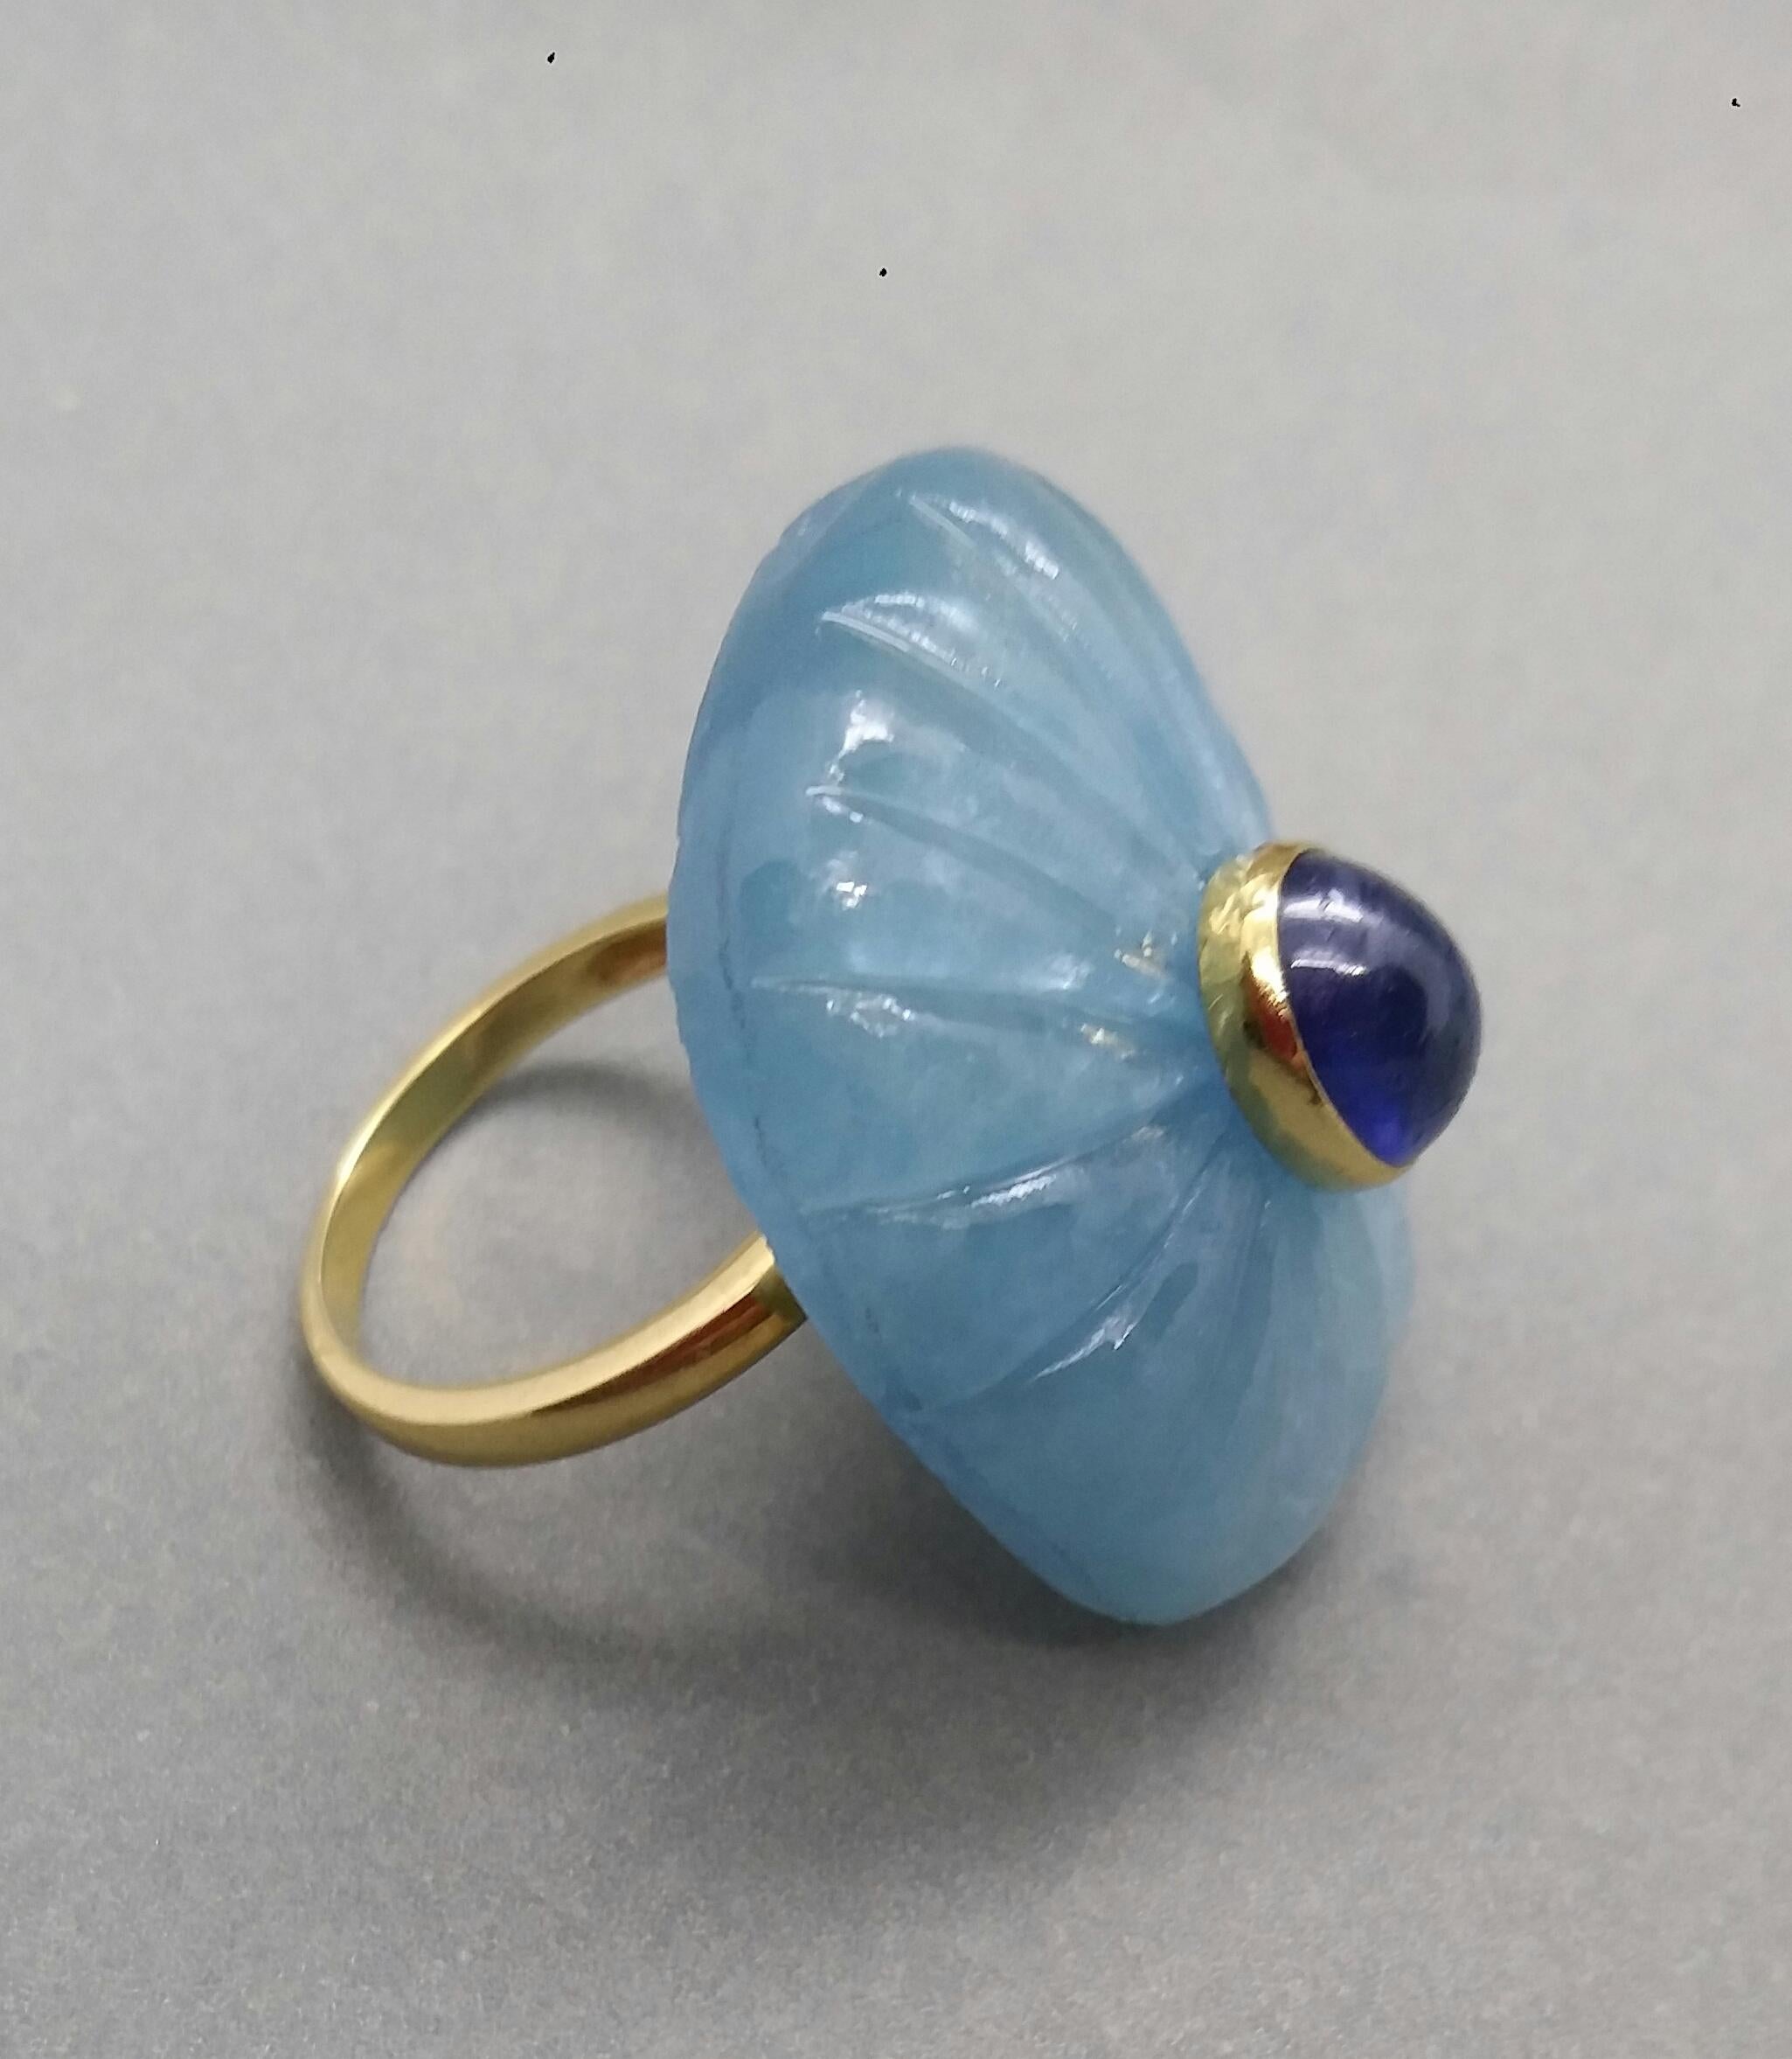 Unique ring with a Big Natural Engraved Cushion Shape Aquamarine ,measuring 30 mm. x 23 mm x 8mm. and weighing 54 Carats with a nice Oval Blue Sapphire Cabochon measuring 6 mm x 8 mm set in 14 kt yellow gold...Ring shank is also in 14 kt  solid